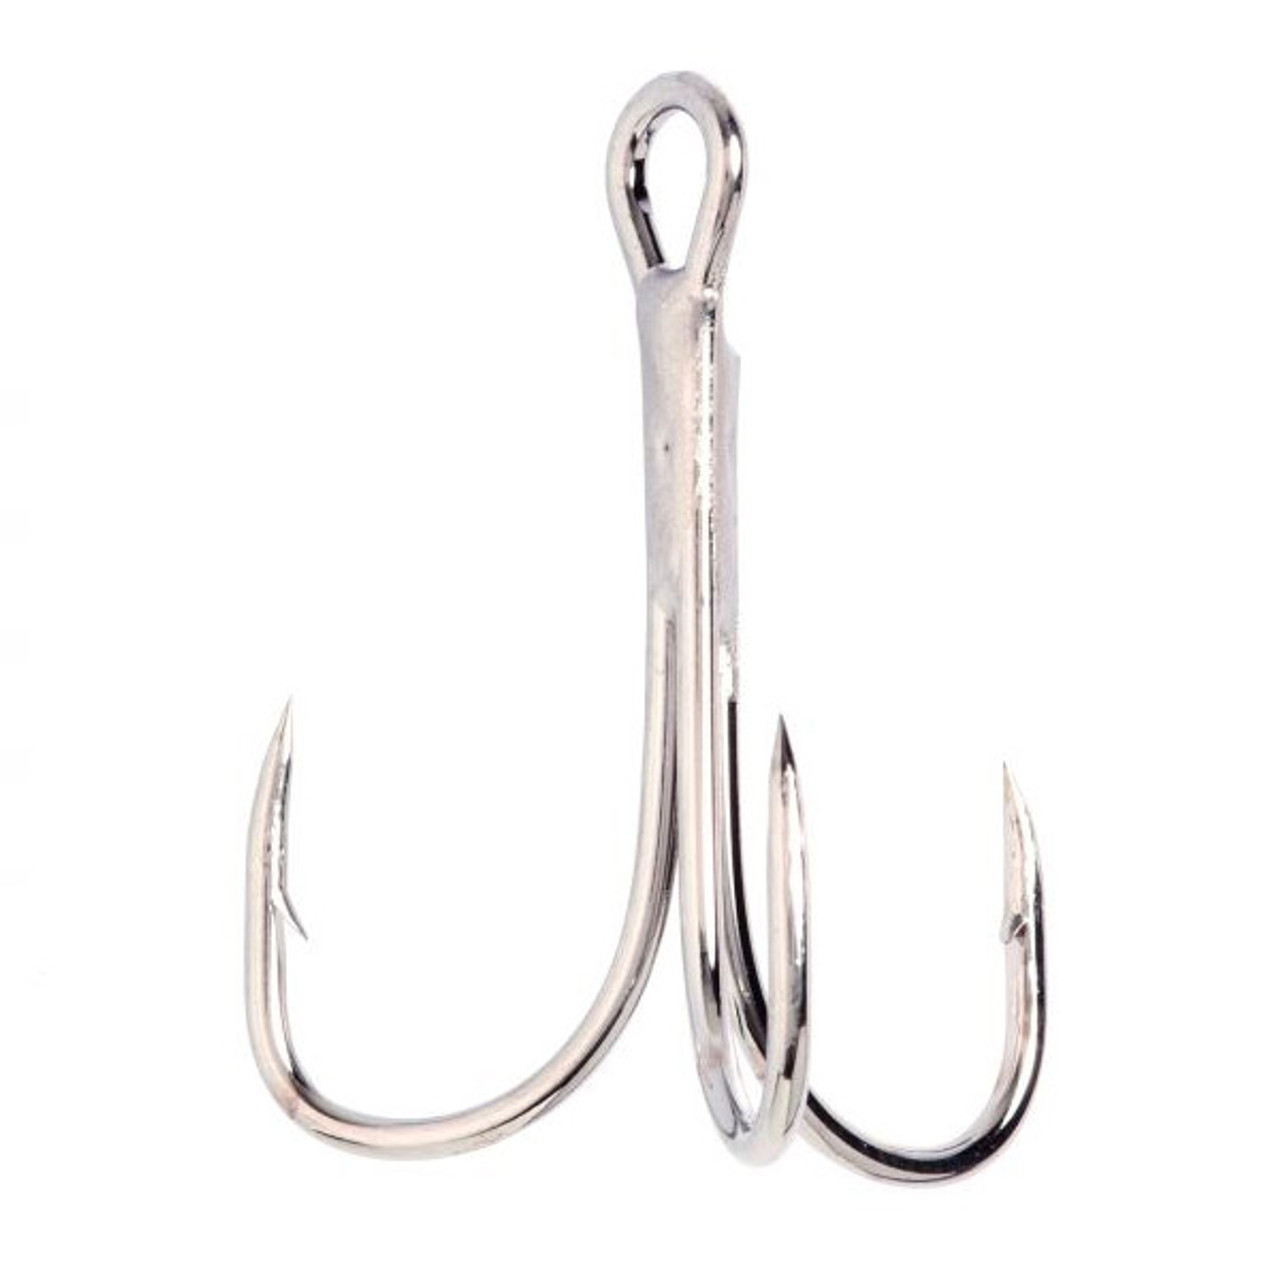 2X Strong Regular Shank Nickel Treble Hooks L375GH by Eagle Claw